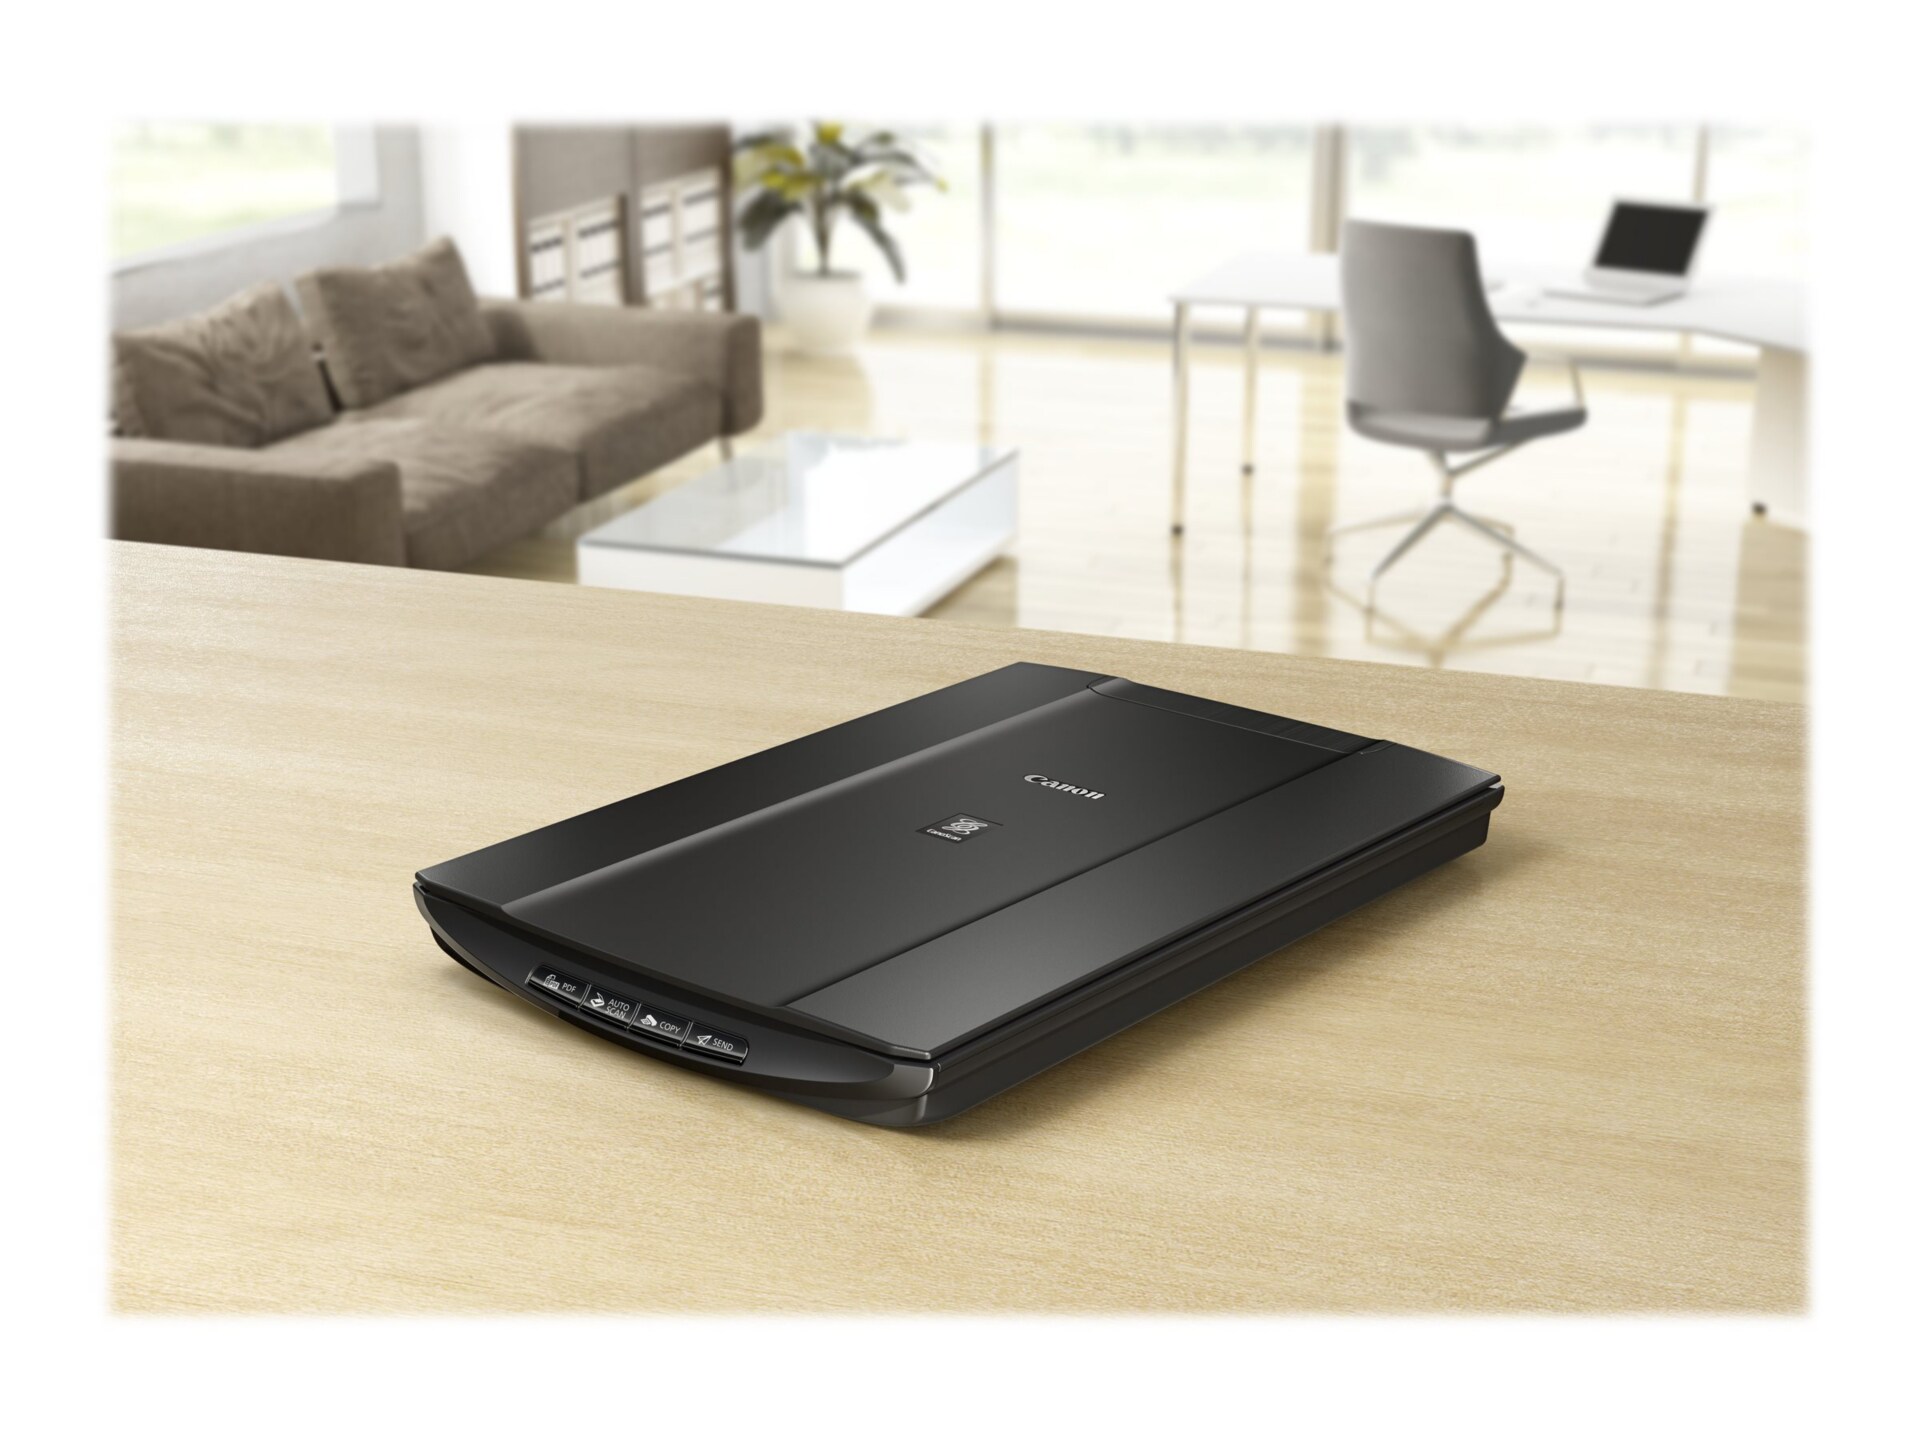 Canon CanoScan LiDE 120 Wired/USB Flatbed Scanner